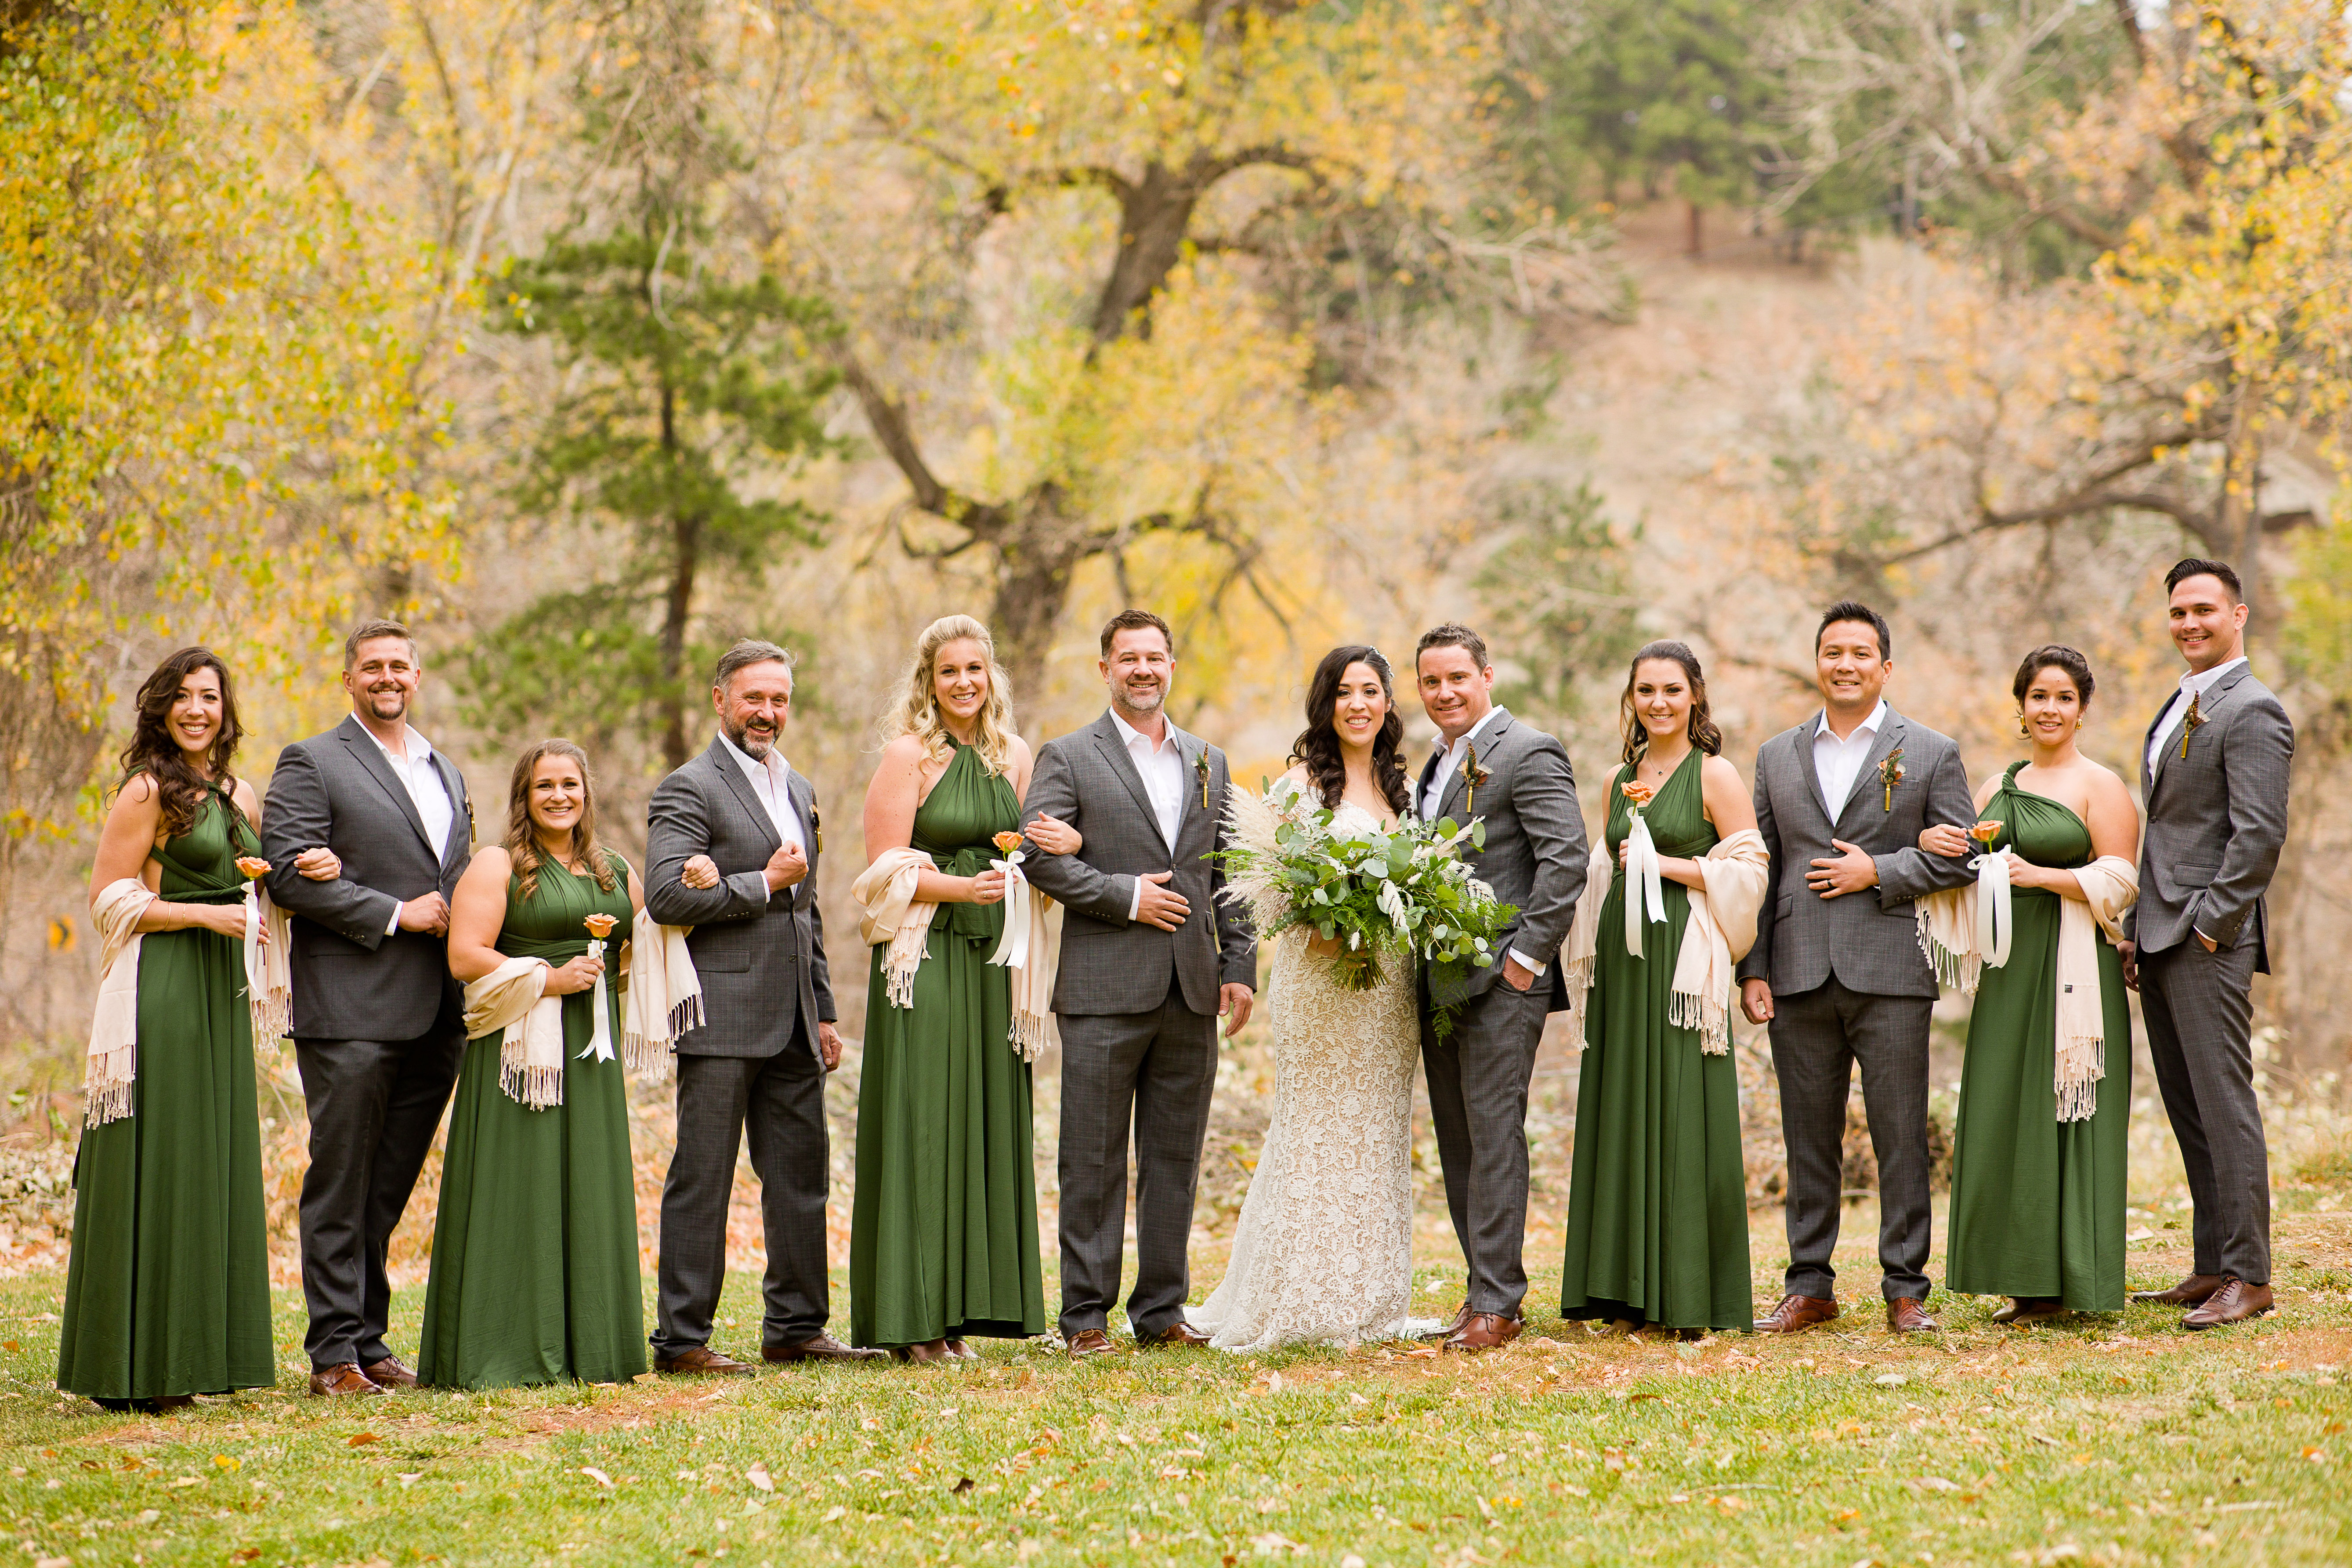 Gorgeous classic bride poses with large bridal party